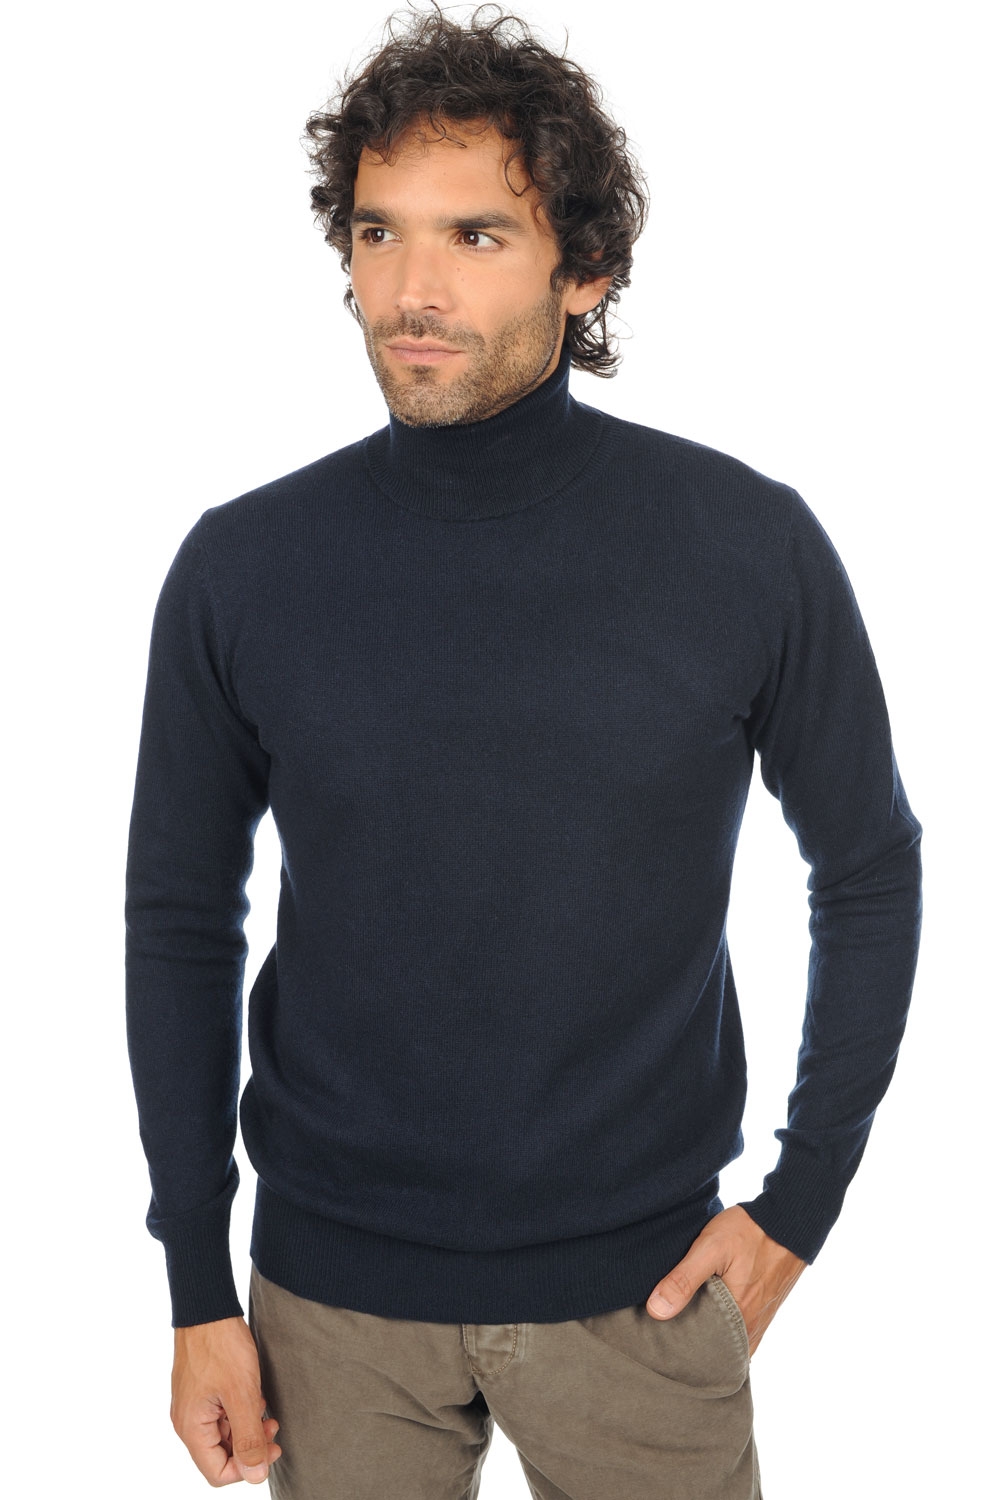 Cachemire pull homme col roule tarry first marine fonce m